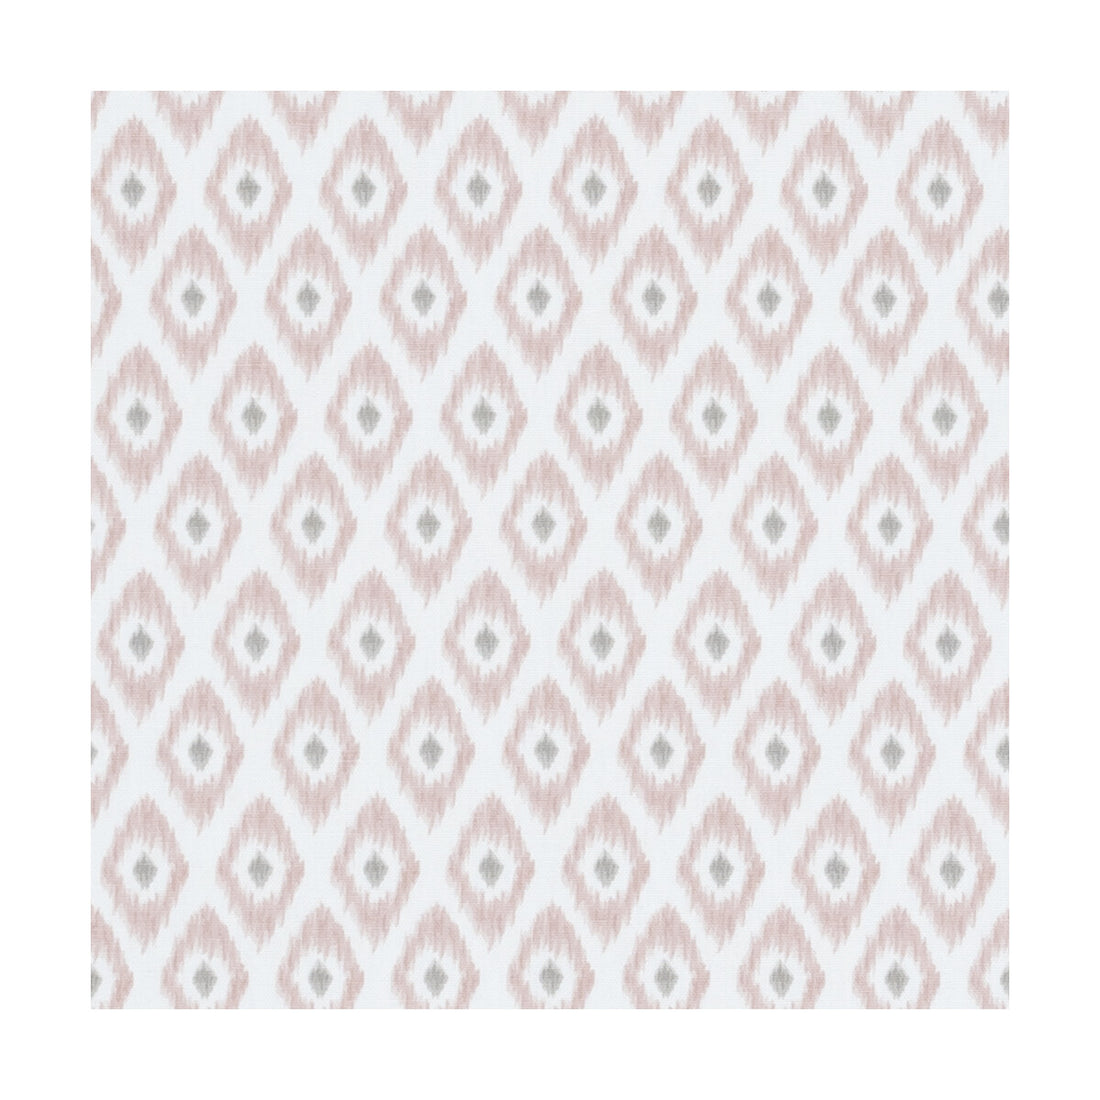 Zora fabric in blush color - pattern F1379/01.CAC.0 - by Clarke And Clarke in the Co-Ordinates By Studio G For C&amp;C collection